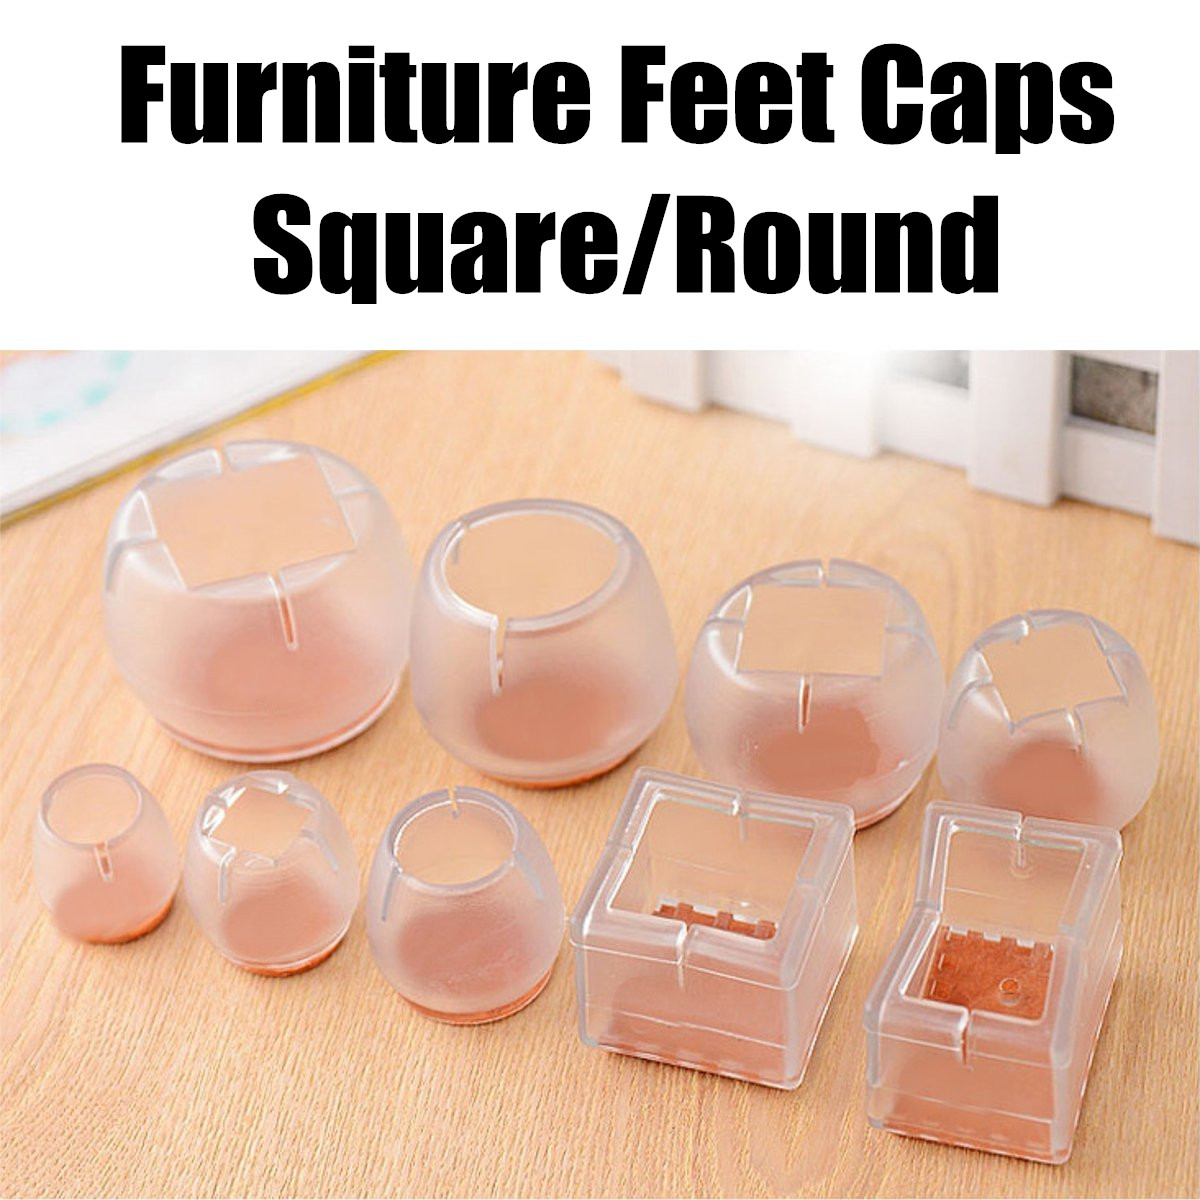 Silicone-Square-Round-Furniture-Feet-Caps-Table-Chair-Leg-Pads-Floor-Protector-Scratchproof-1320424-3